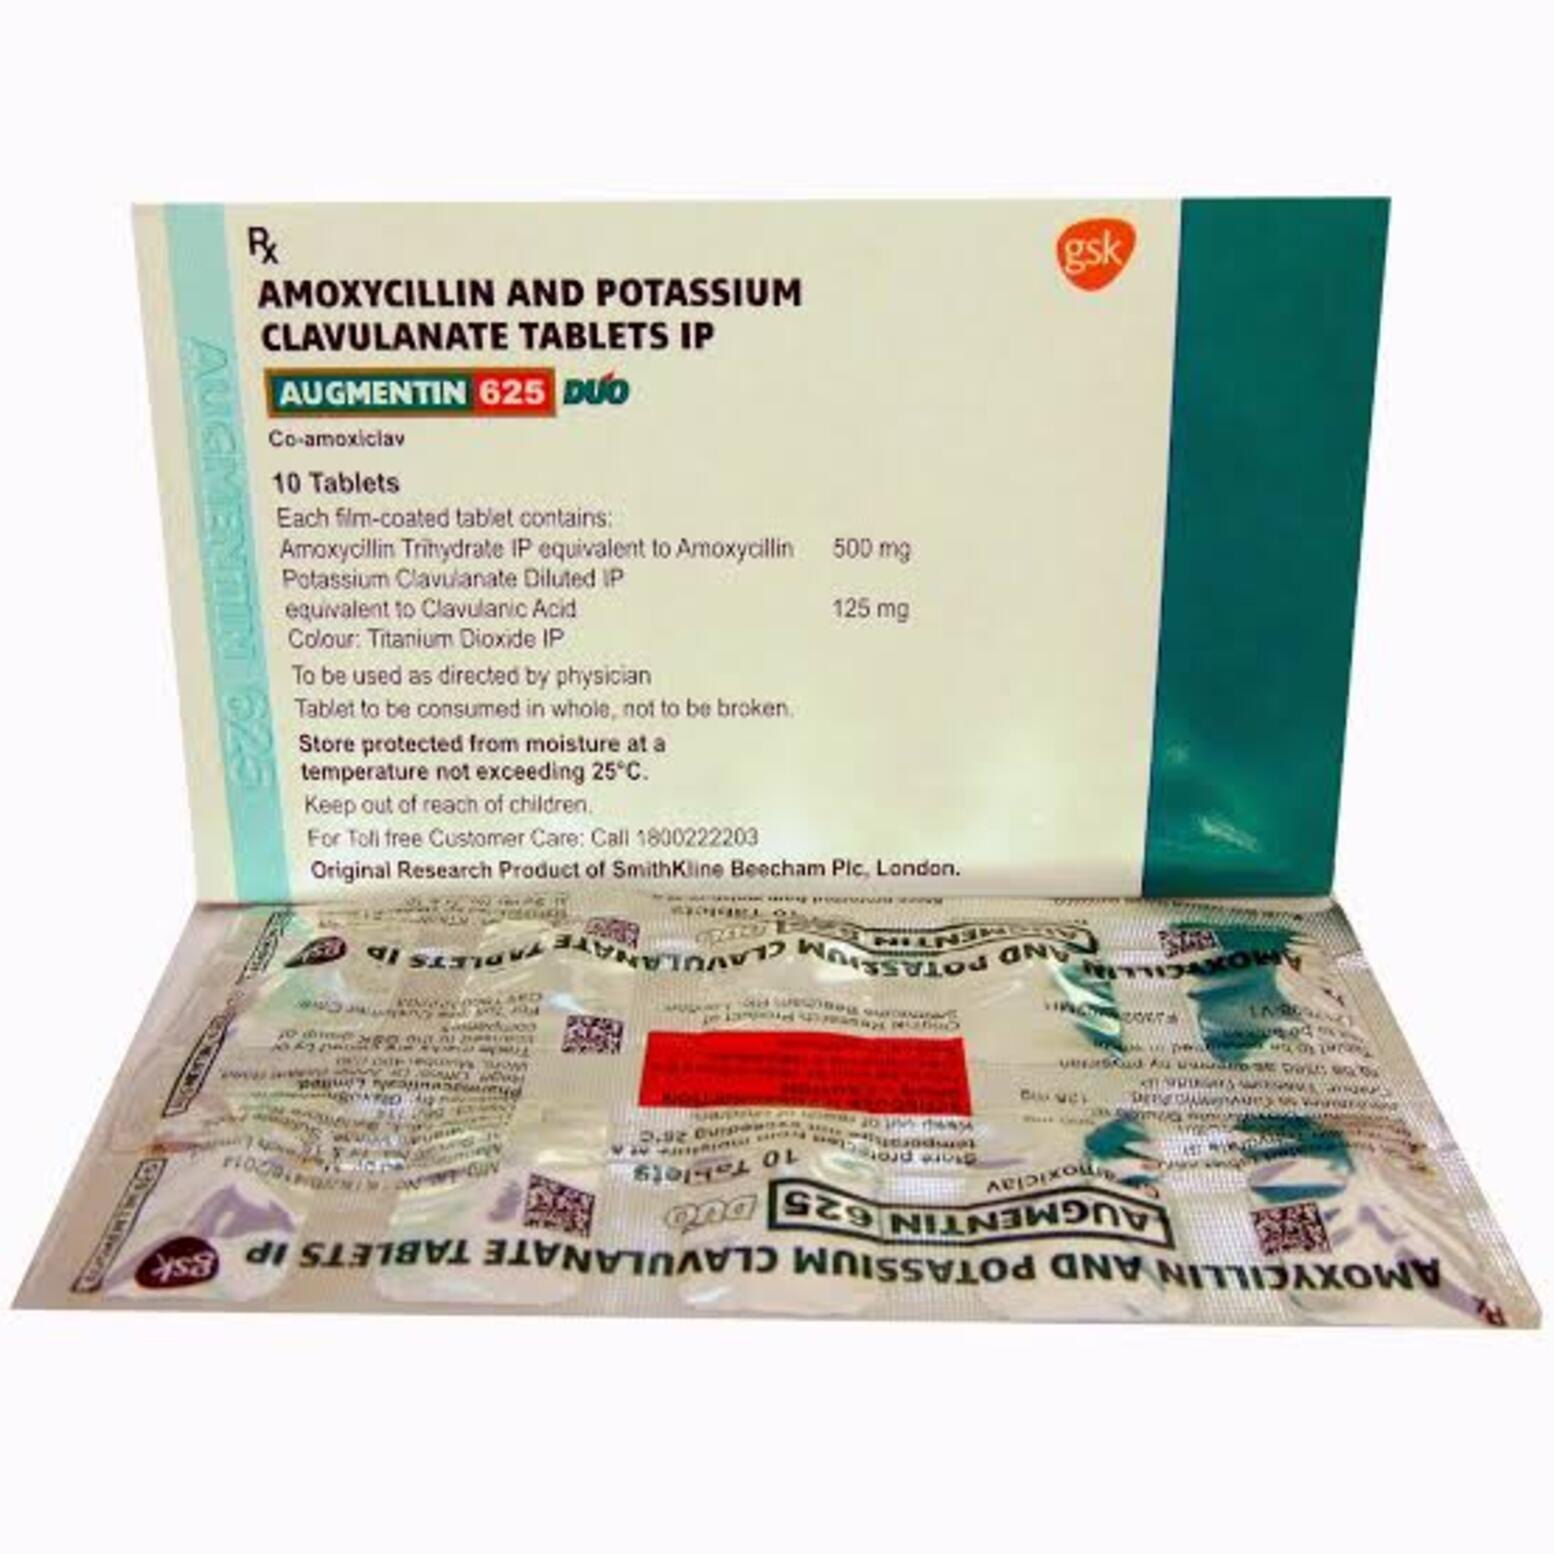 RB

AMOXYCILLIN AND POTASSIUM 3
~ CLAVULANATE TABLETS IP
| AUGMENTIN 625 LJ
,  Co-amoxiclav
10 Tablets
) Each fim-coated tablet contains

Amoxydllin Trinydrate IP equivalent to Amoxycillin
Potassium Clavifanate Diluted ©

equivalent to Clavulanic Acid

| Colour: Titanium Dioxide IP

  
 
   
   
 
 
 
 
 
 
   
 

500 mg

125mg
To be used as directed by physician
Tablet to be consumed in whole, not to be broken
| Store protected from moisture at a

temperature not exceeding 25°C

Keep out of reach of children

For Toll free Customer Care

  

Call 1800222203
Original Research Product of SmithKline Beecham Pic, London

Te RIE.

 

 

Artest Seb ewan mmr

SEE an

Yl savas Vinay? Noseres 0

+1 . nr A ay
Cesta An = 1 rman SS

 
  
   
  
  
  

  

  

5

sa ALYNVINAYT) WNissyi0d ANTI